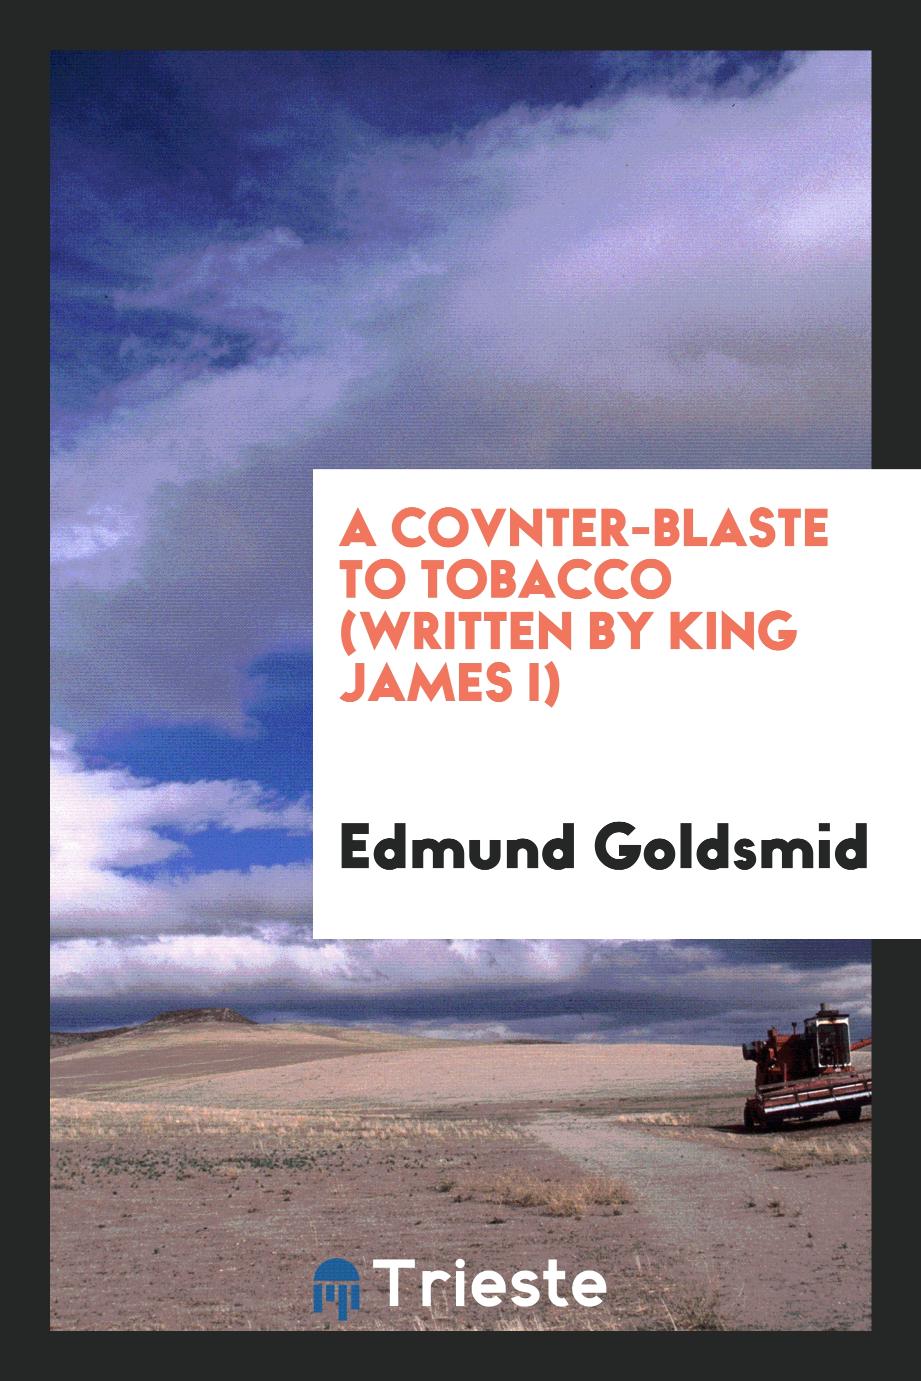 A covnter-blaste to tobacco (written by King James I)